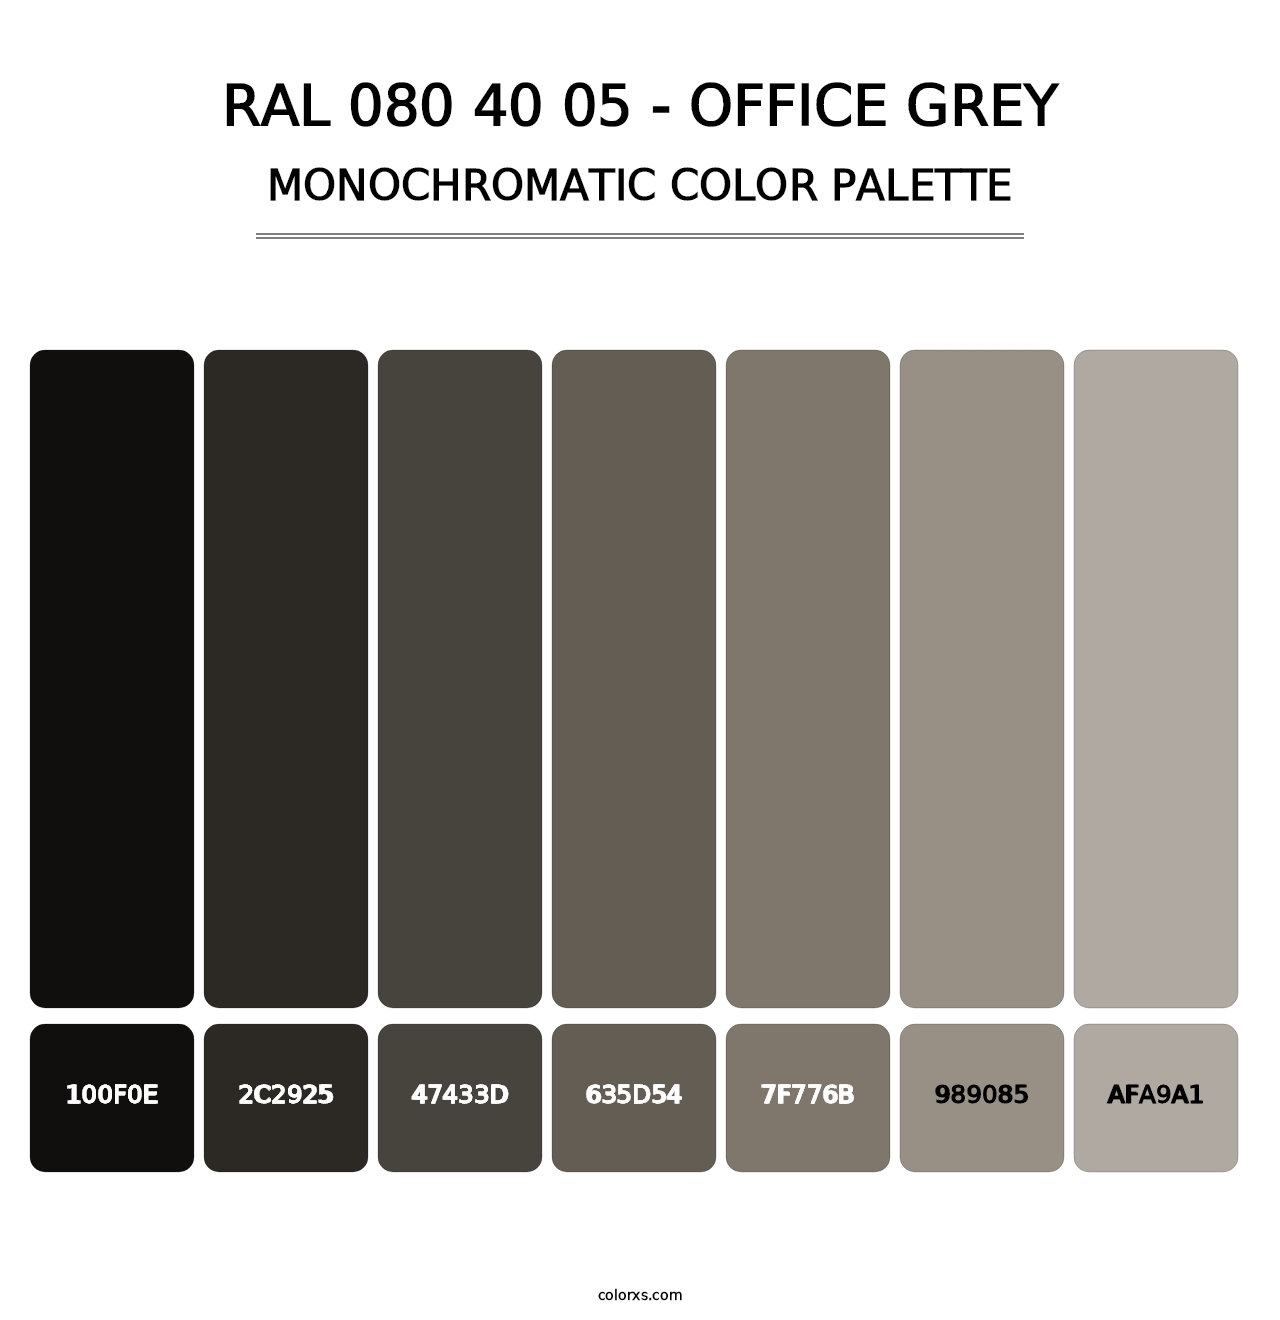 RAL 080 40 05 - Office Grey - Monochromatic Color Palette